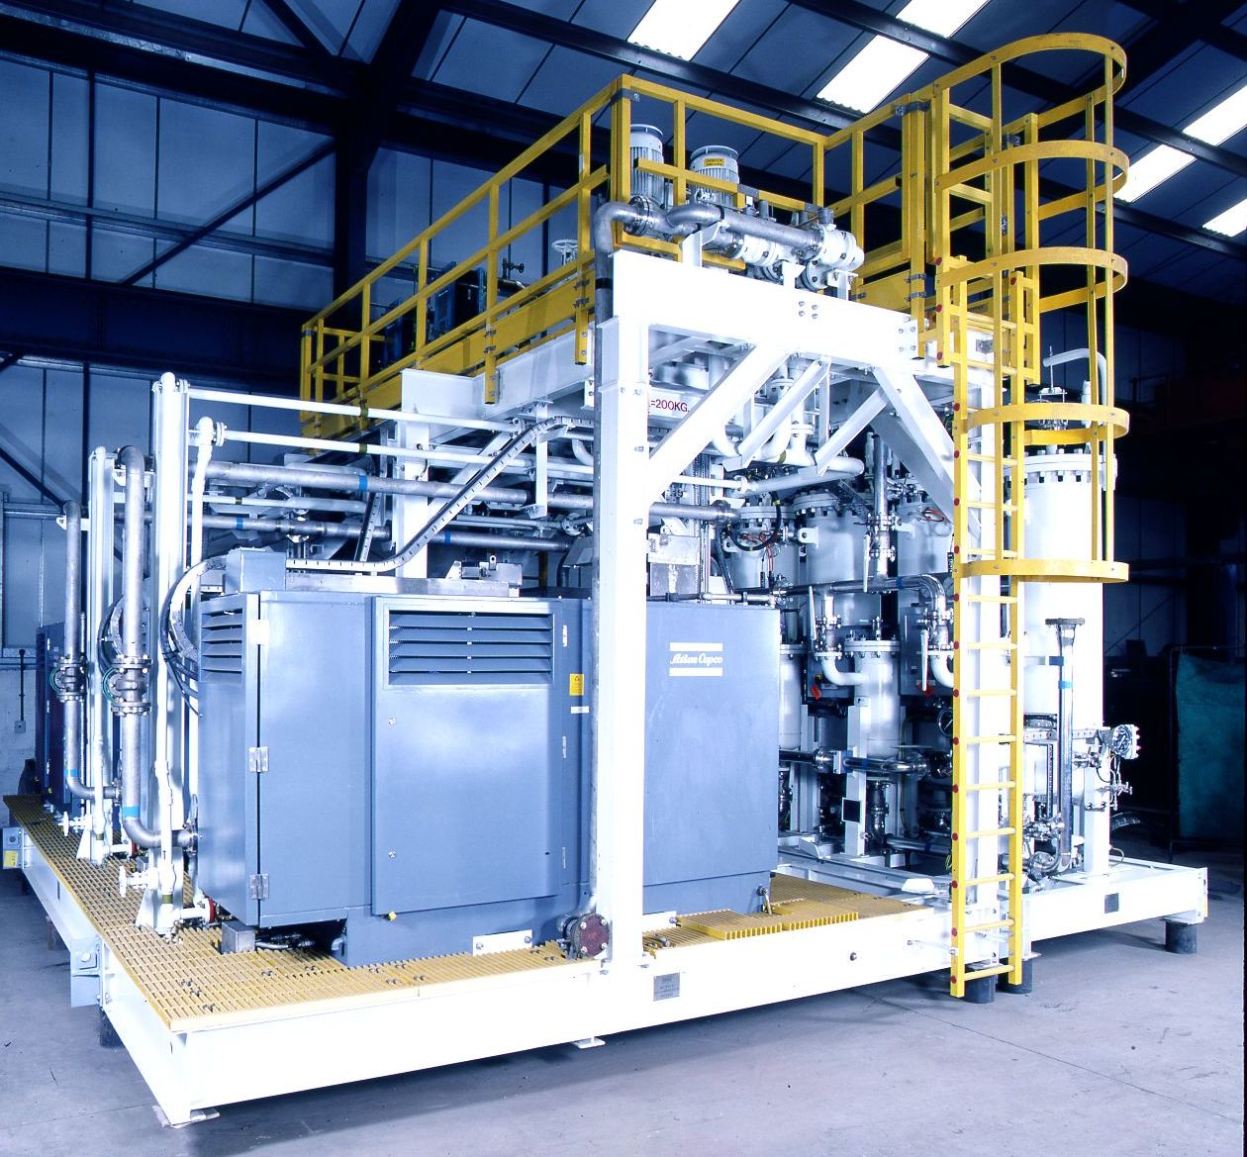 KGD Design & Manufacture Packaged Process Plant Equipment & Pressure Vessels